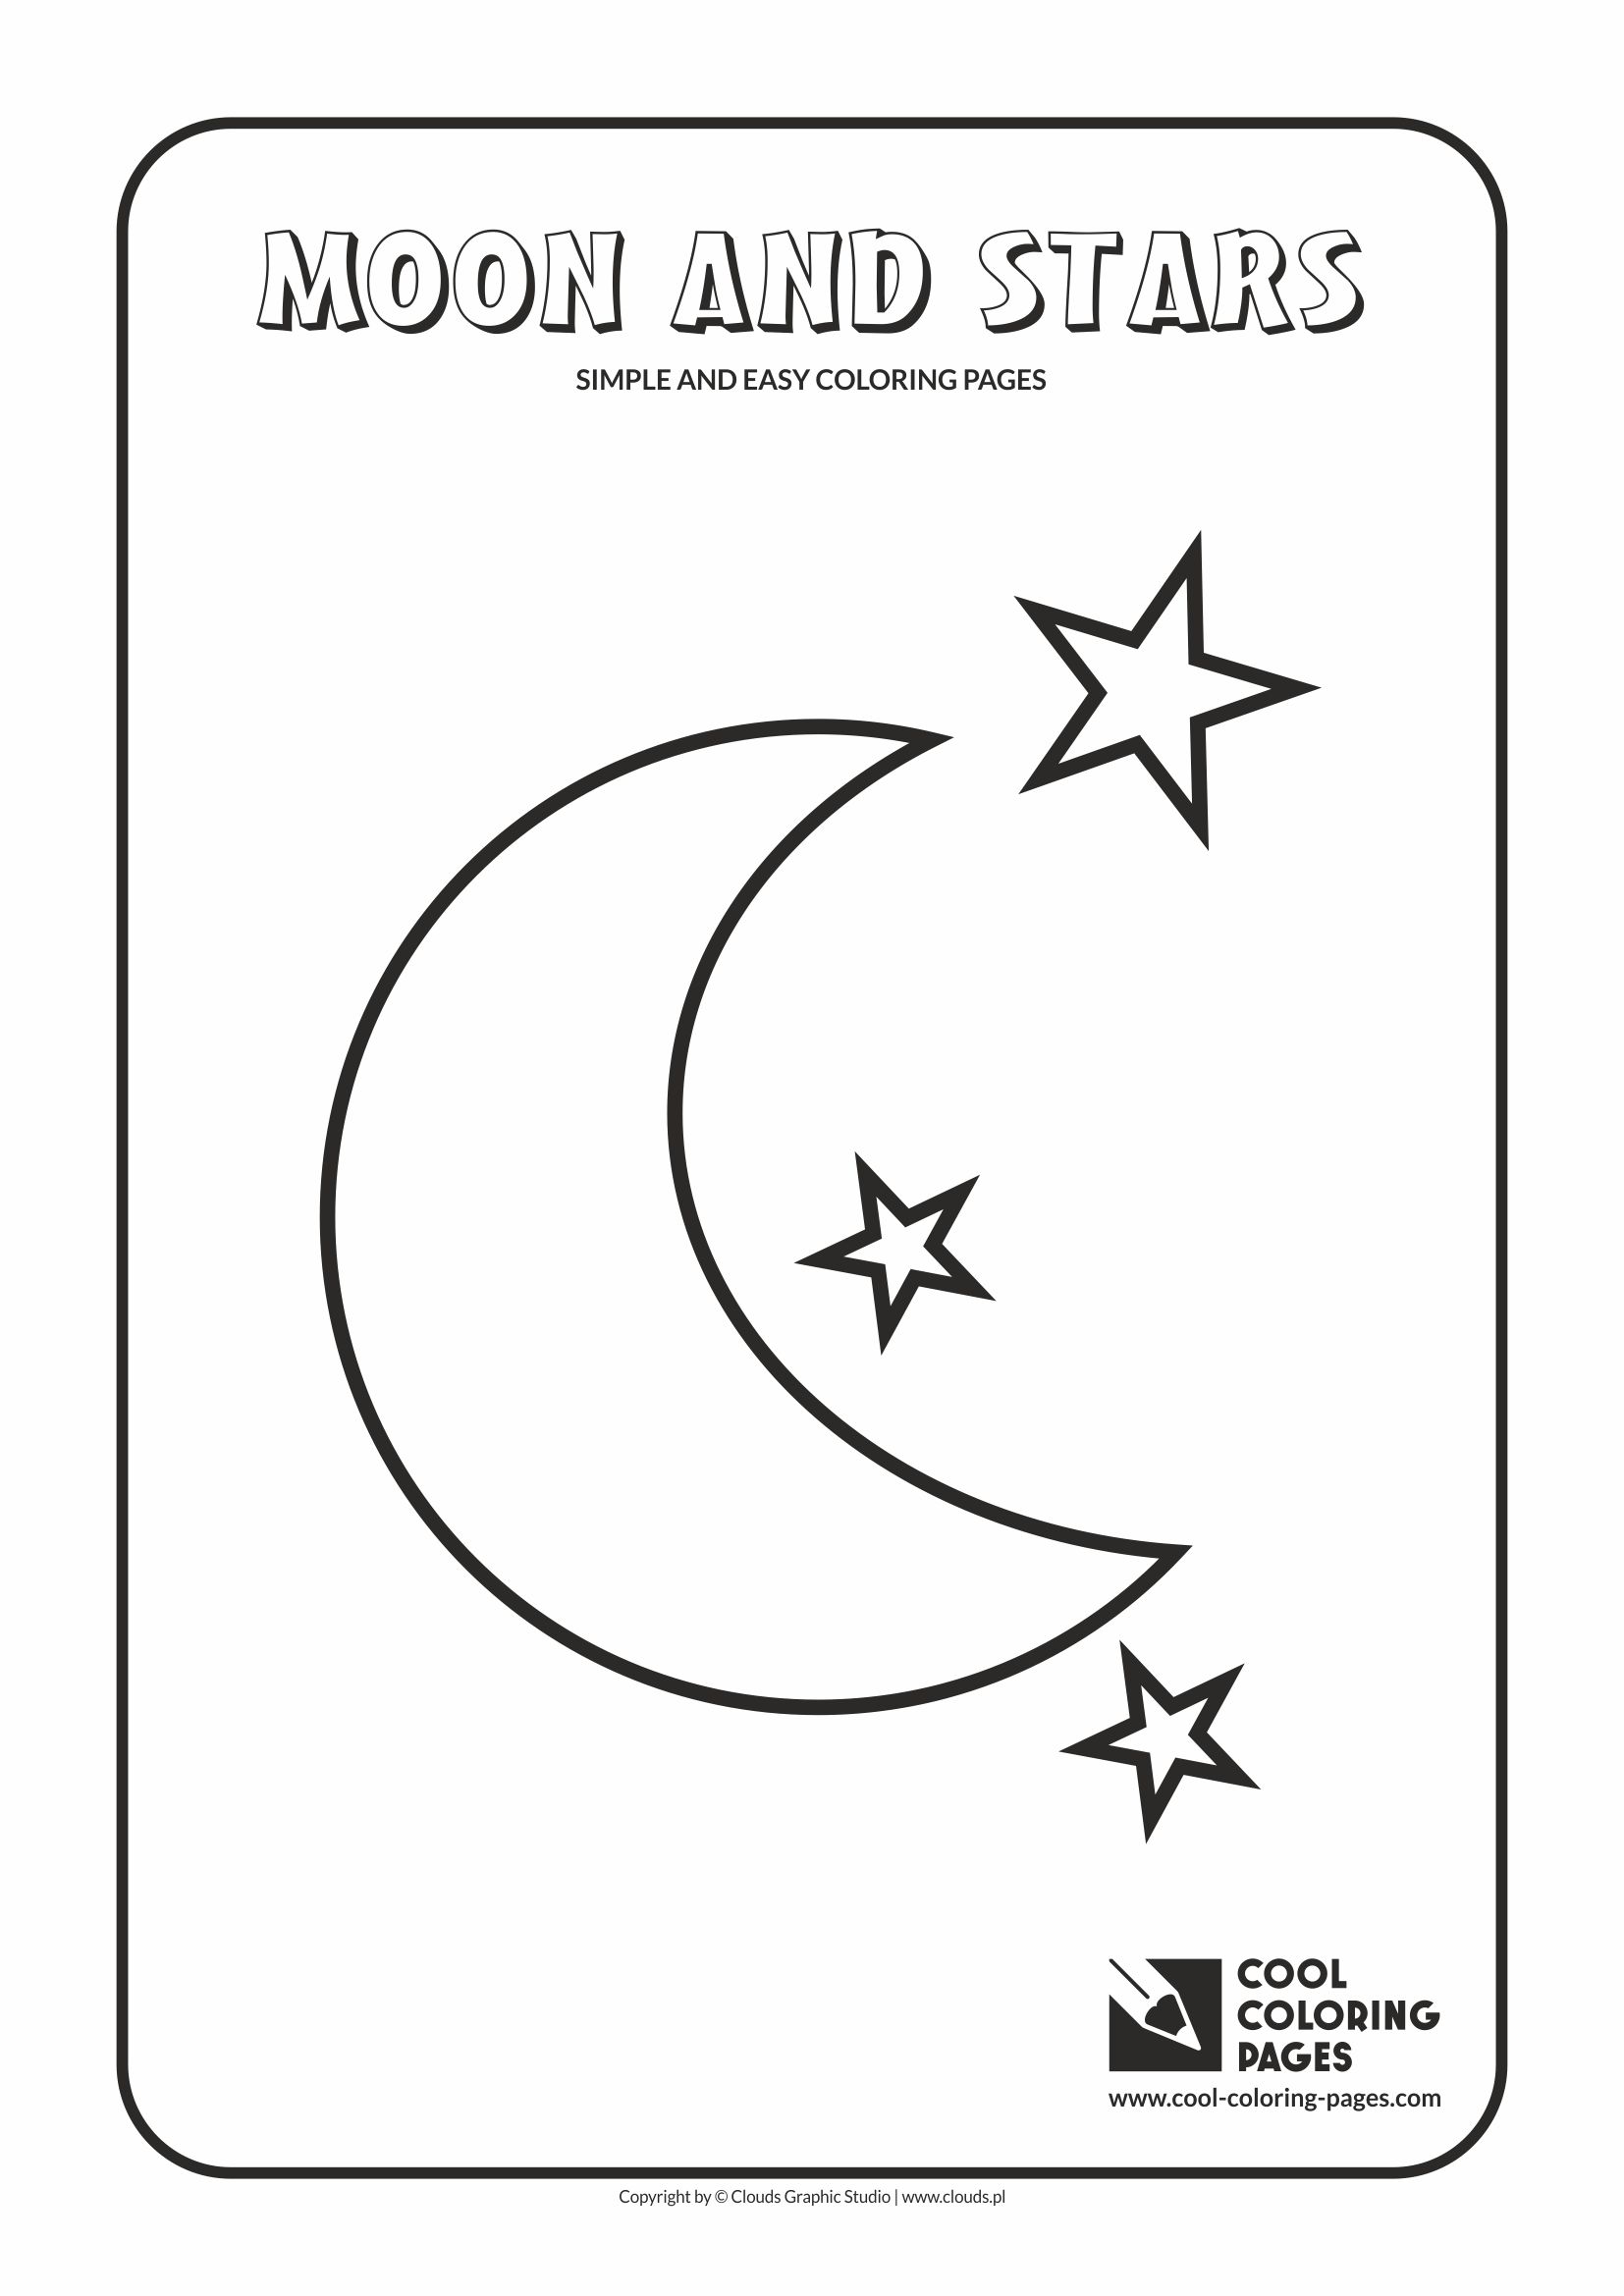 Simple and easy coloring pages for toddlers - Moon and stars